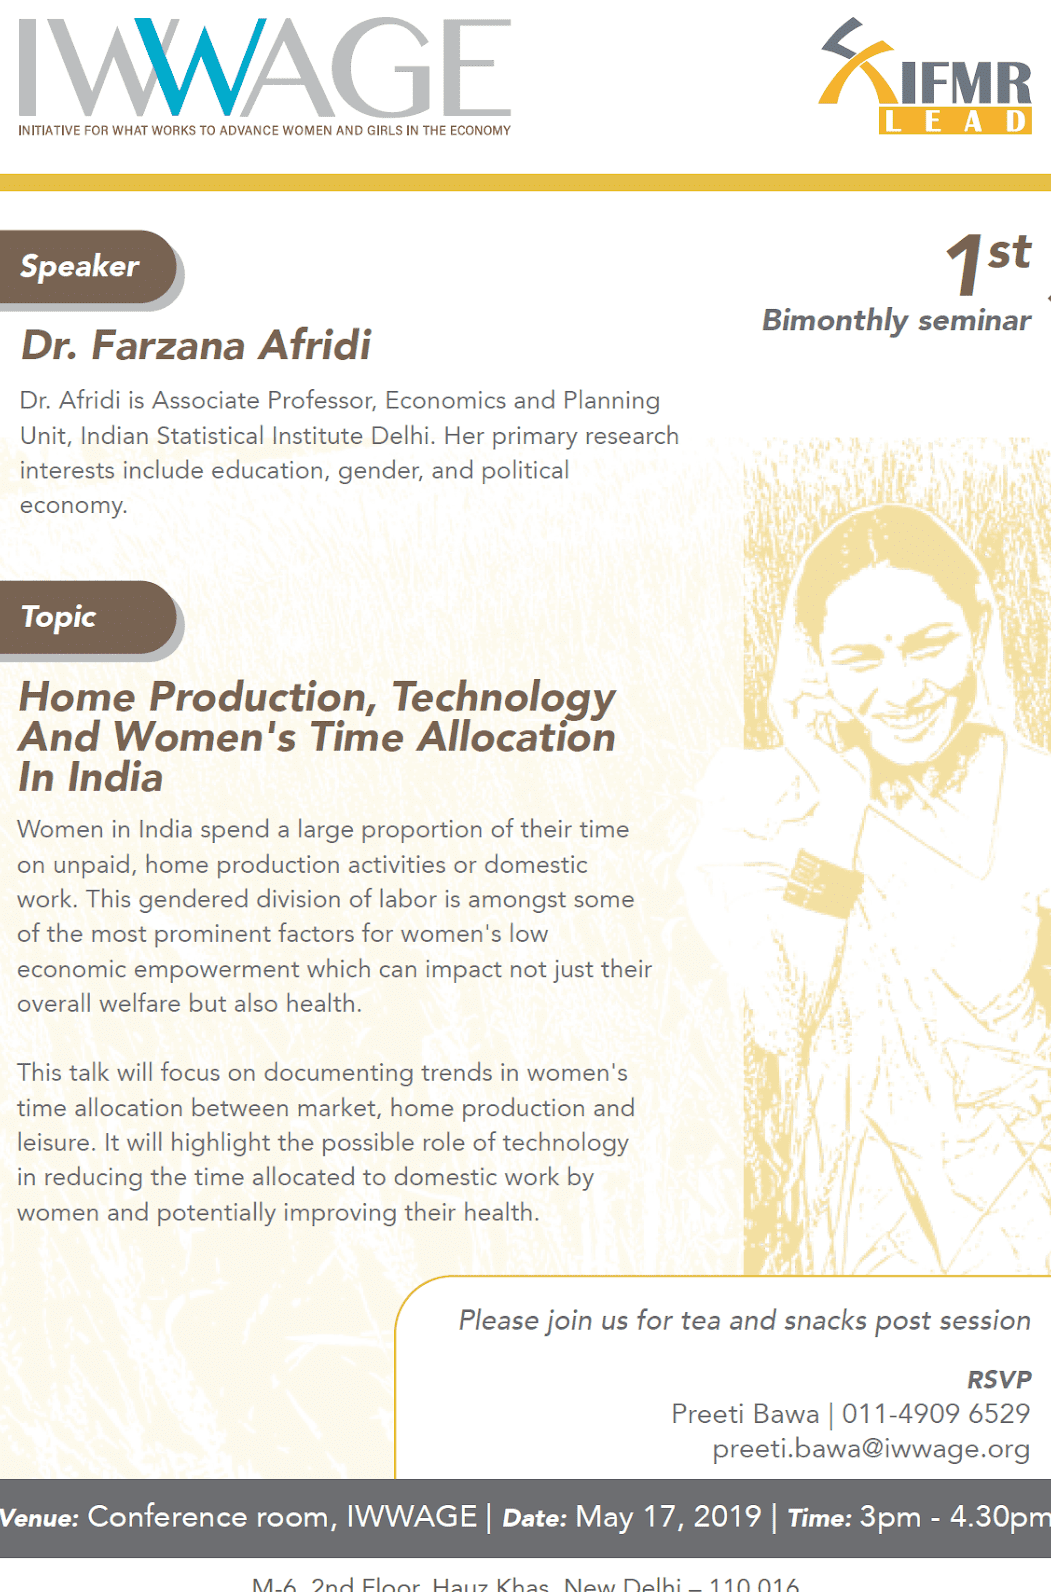 Home Production, Technology, and Women’s Time Allocation in India